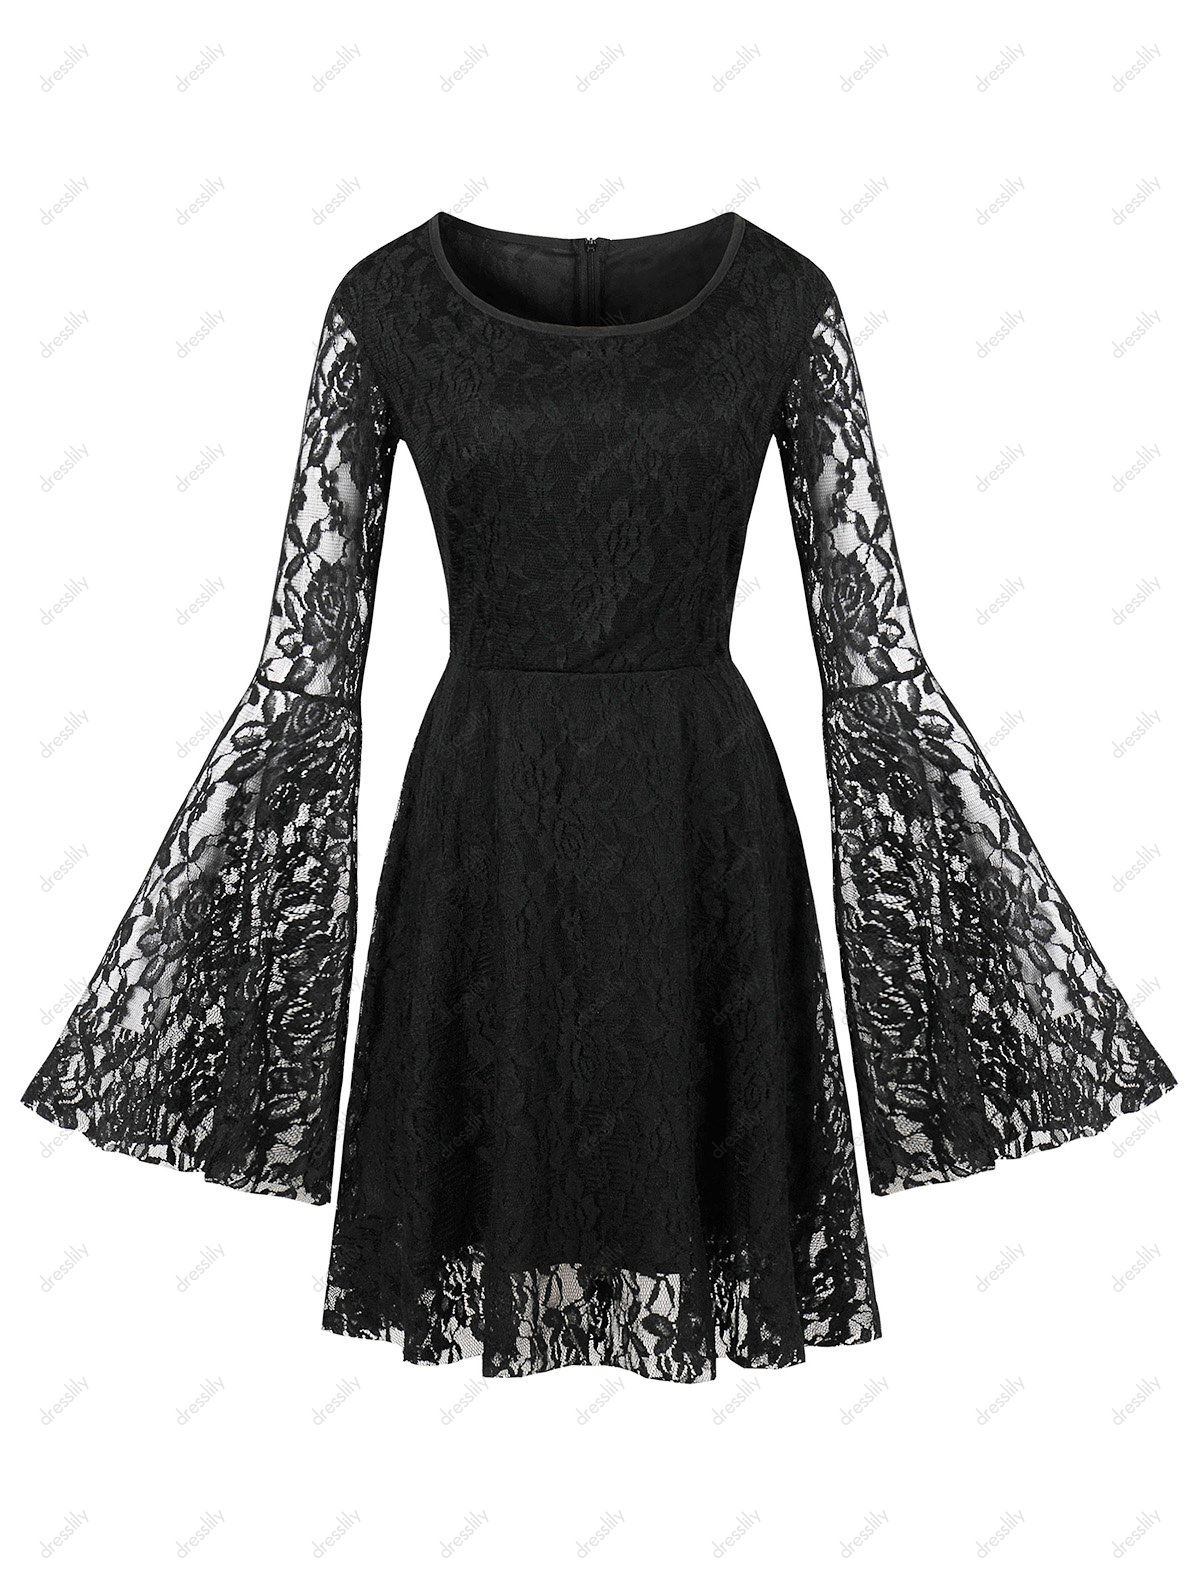 [38% OFF] 2020 Gothic Bell Sleeve Lace Dress In BLACK | DressLily